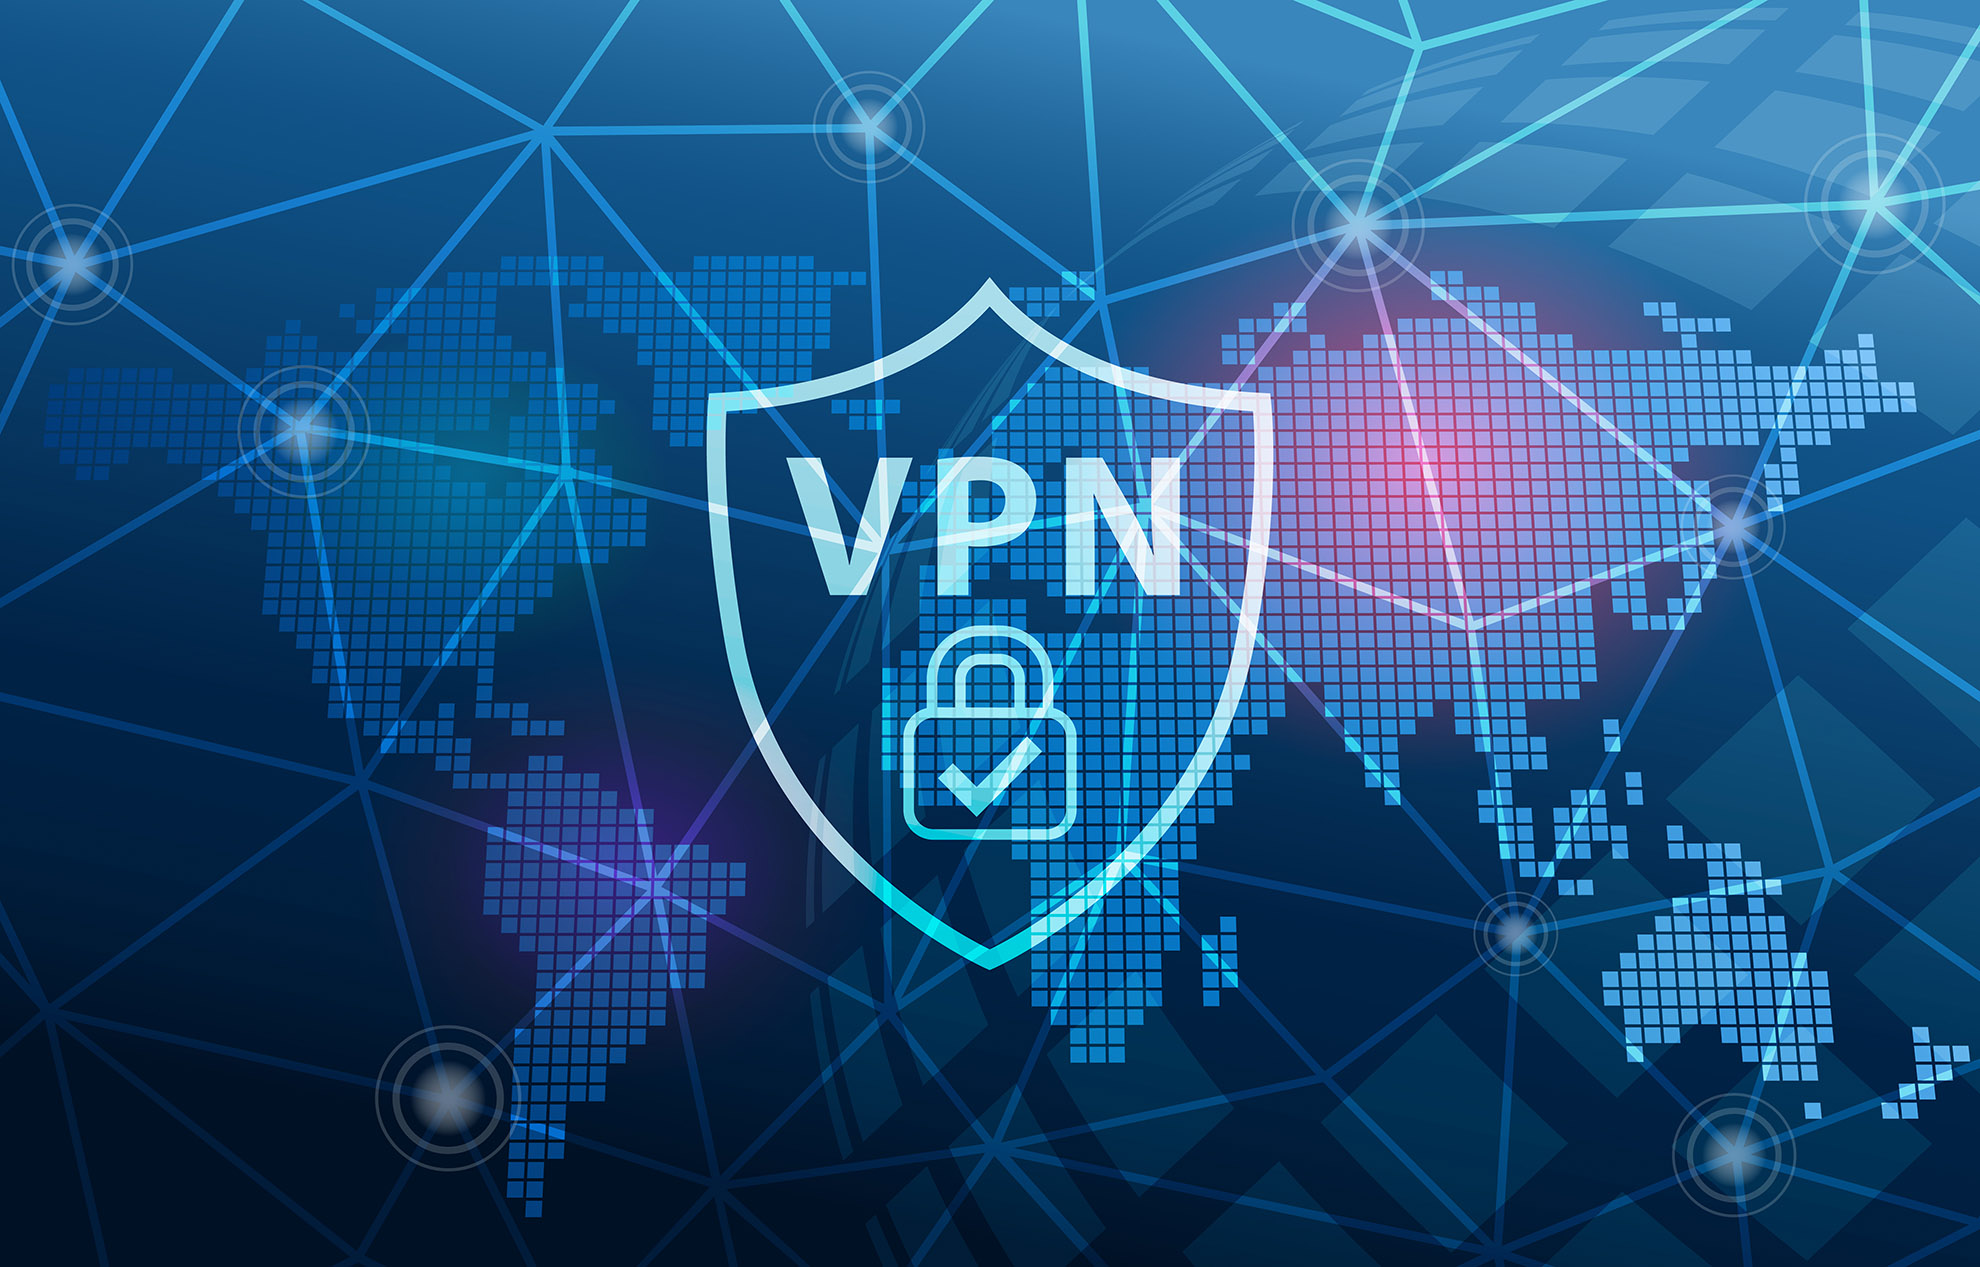 VPNs what are they? How do they work?